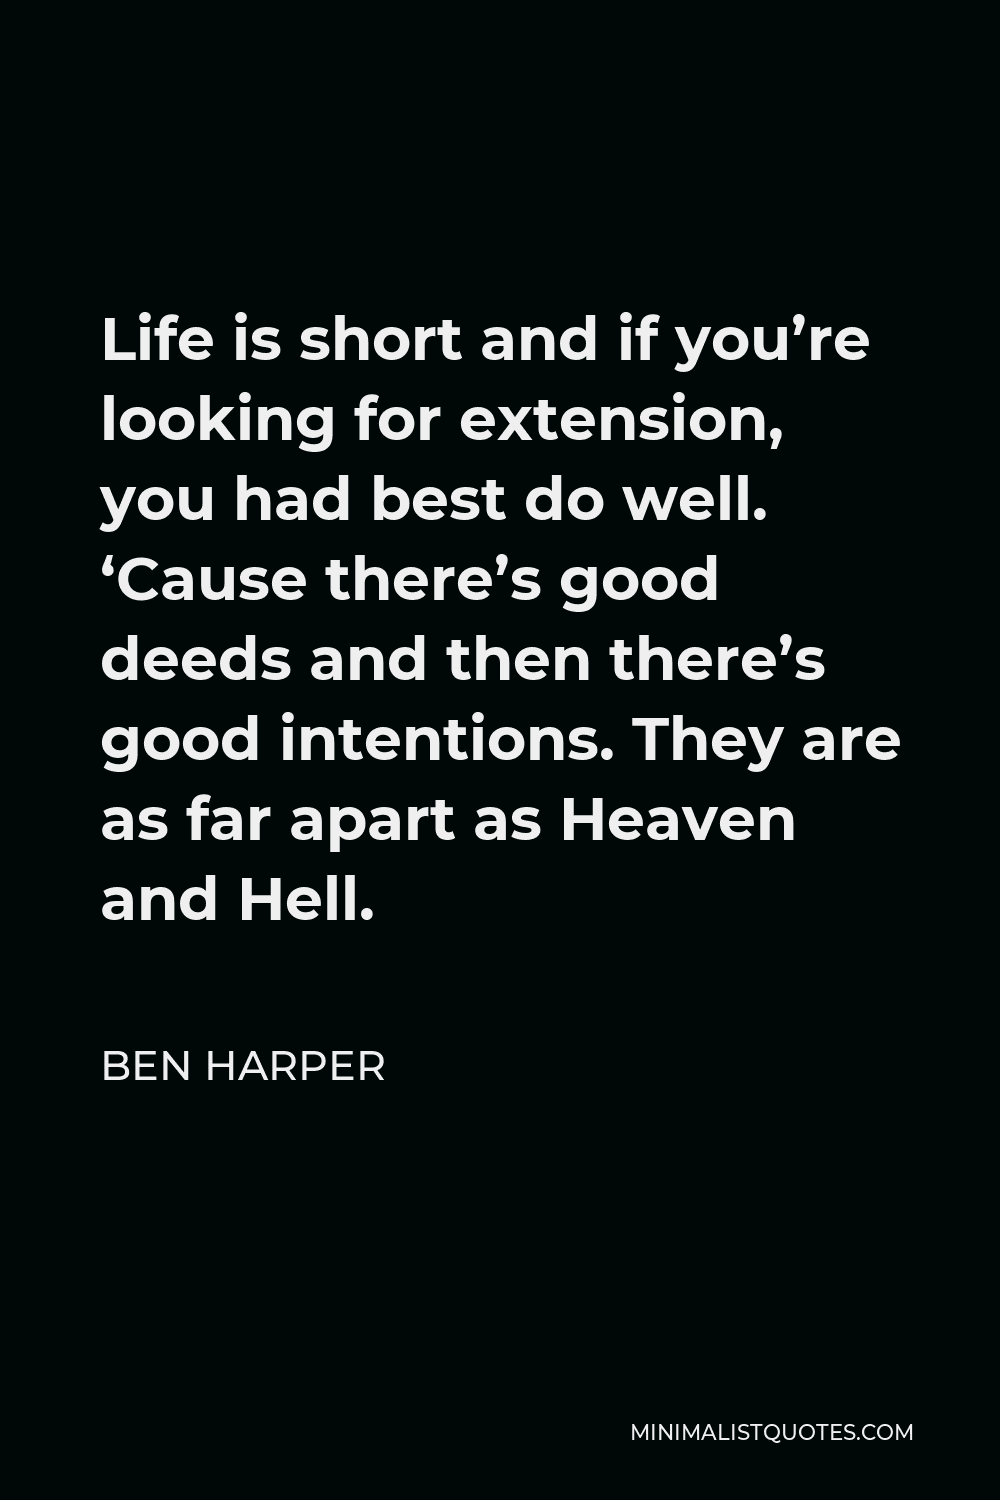 Ben Harper Quote - Life is short and if you’re looking for extension, you had best do well. ‘Cause there’s good deeds and then there’s good intentions. They are as far apart as Heaven and Hell.